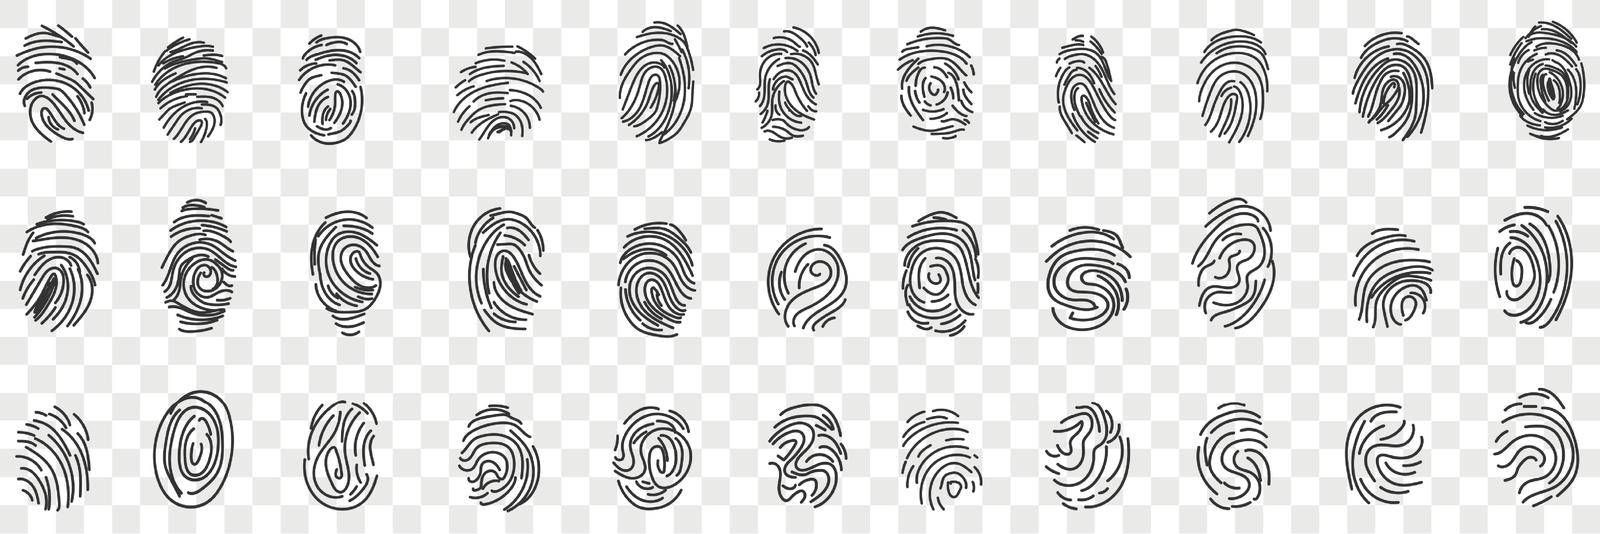 Fingerprints personal identity doodle set. Collection of hand drawn various human fingerprints for identifying person or passport identification or traveling isolated on transparent background